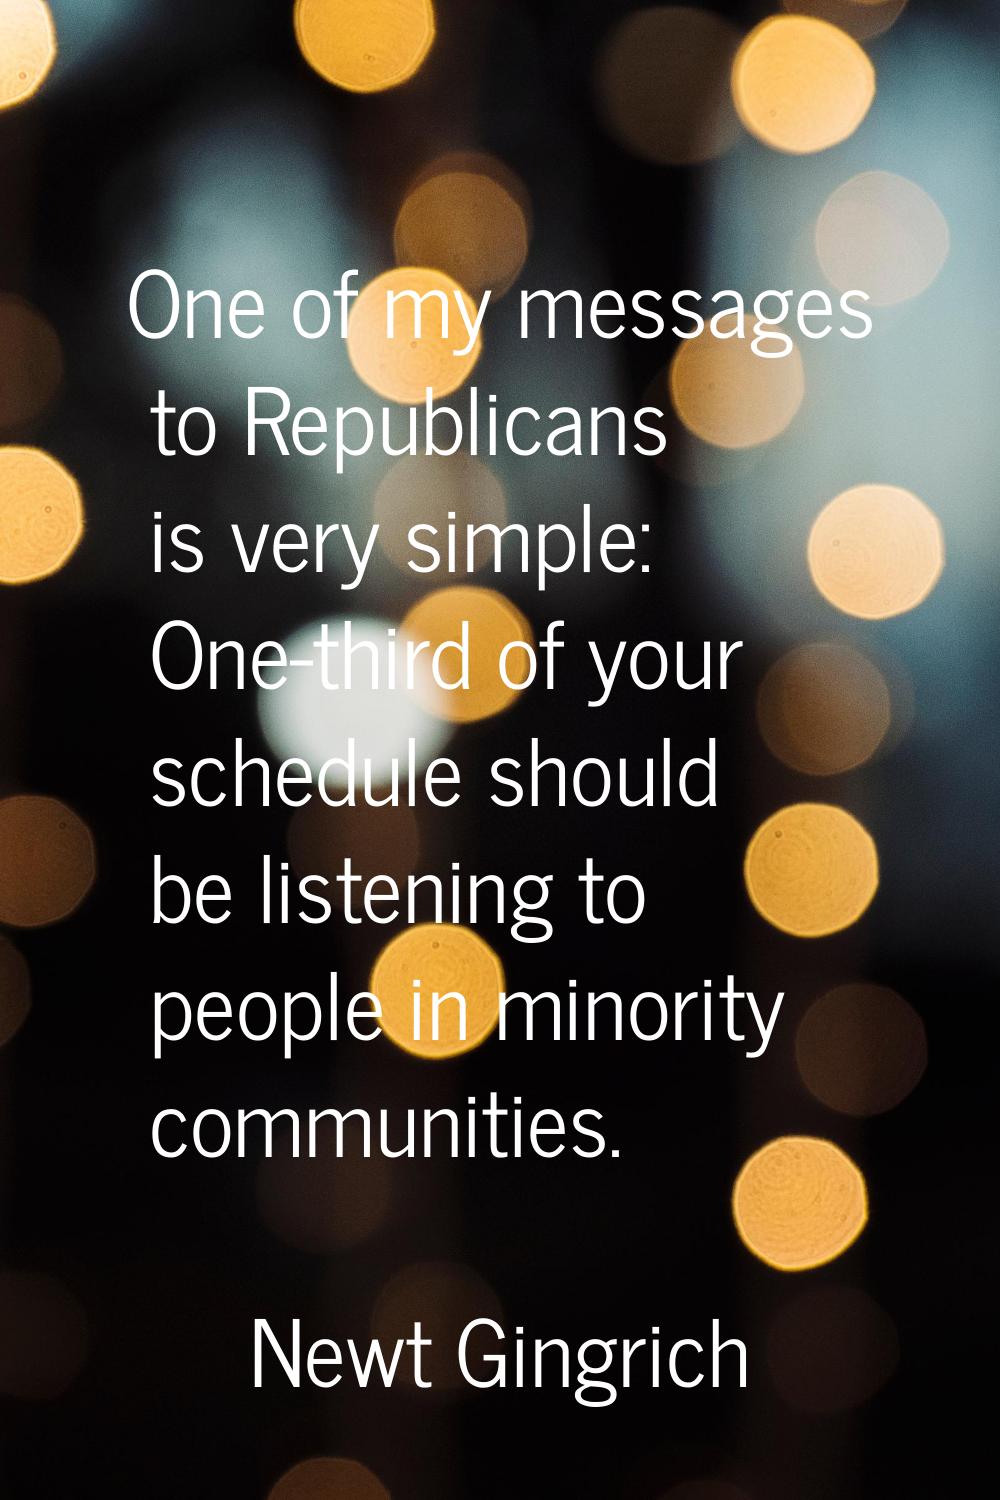 One of my messages to Republicans is very simple: One-third of your schedule should be listening to